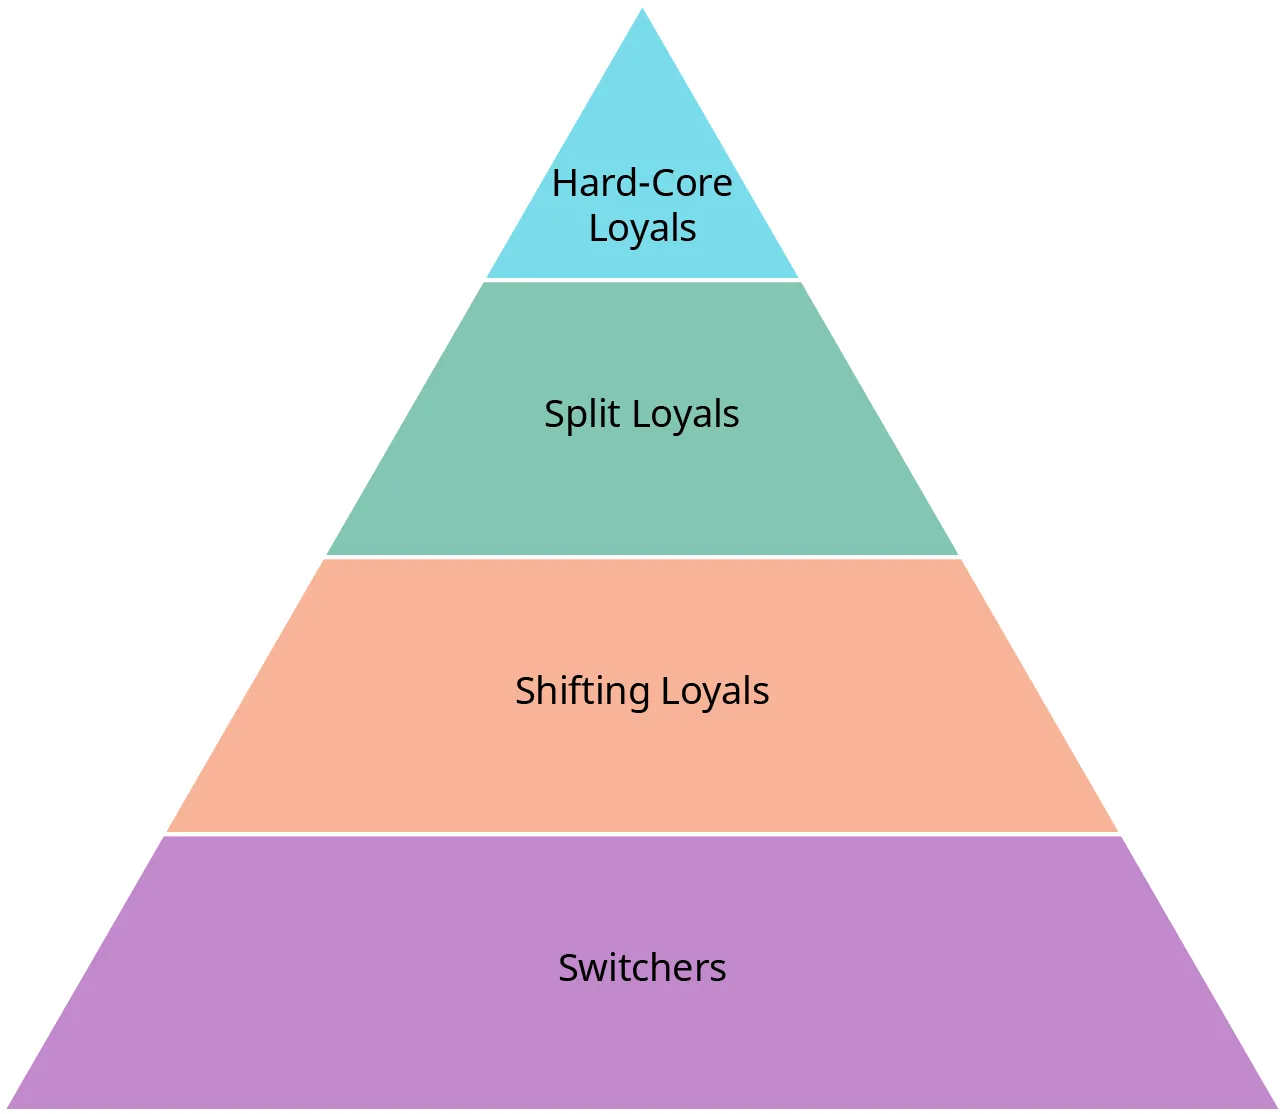 Loyalty categories are shown in a triangle divided horizontally. As you move up the triangle, the amount of customers represented gets smaller. Started at the bottom of the triangle, the different types of customers are switchers, shifting loyals, split loyals, and hard-core loyals.